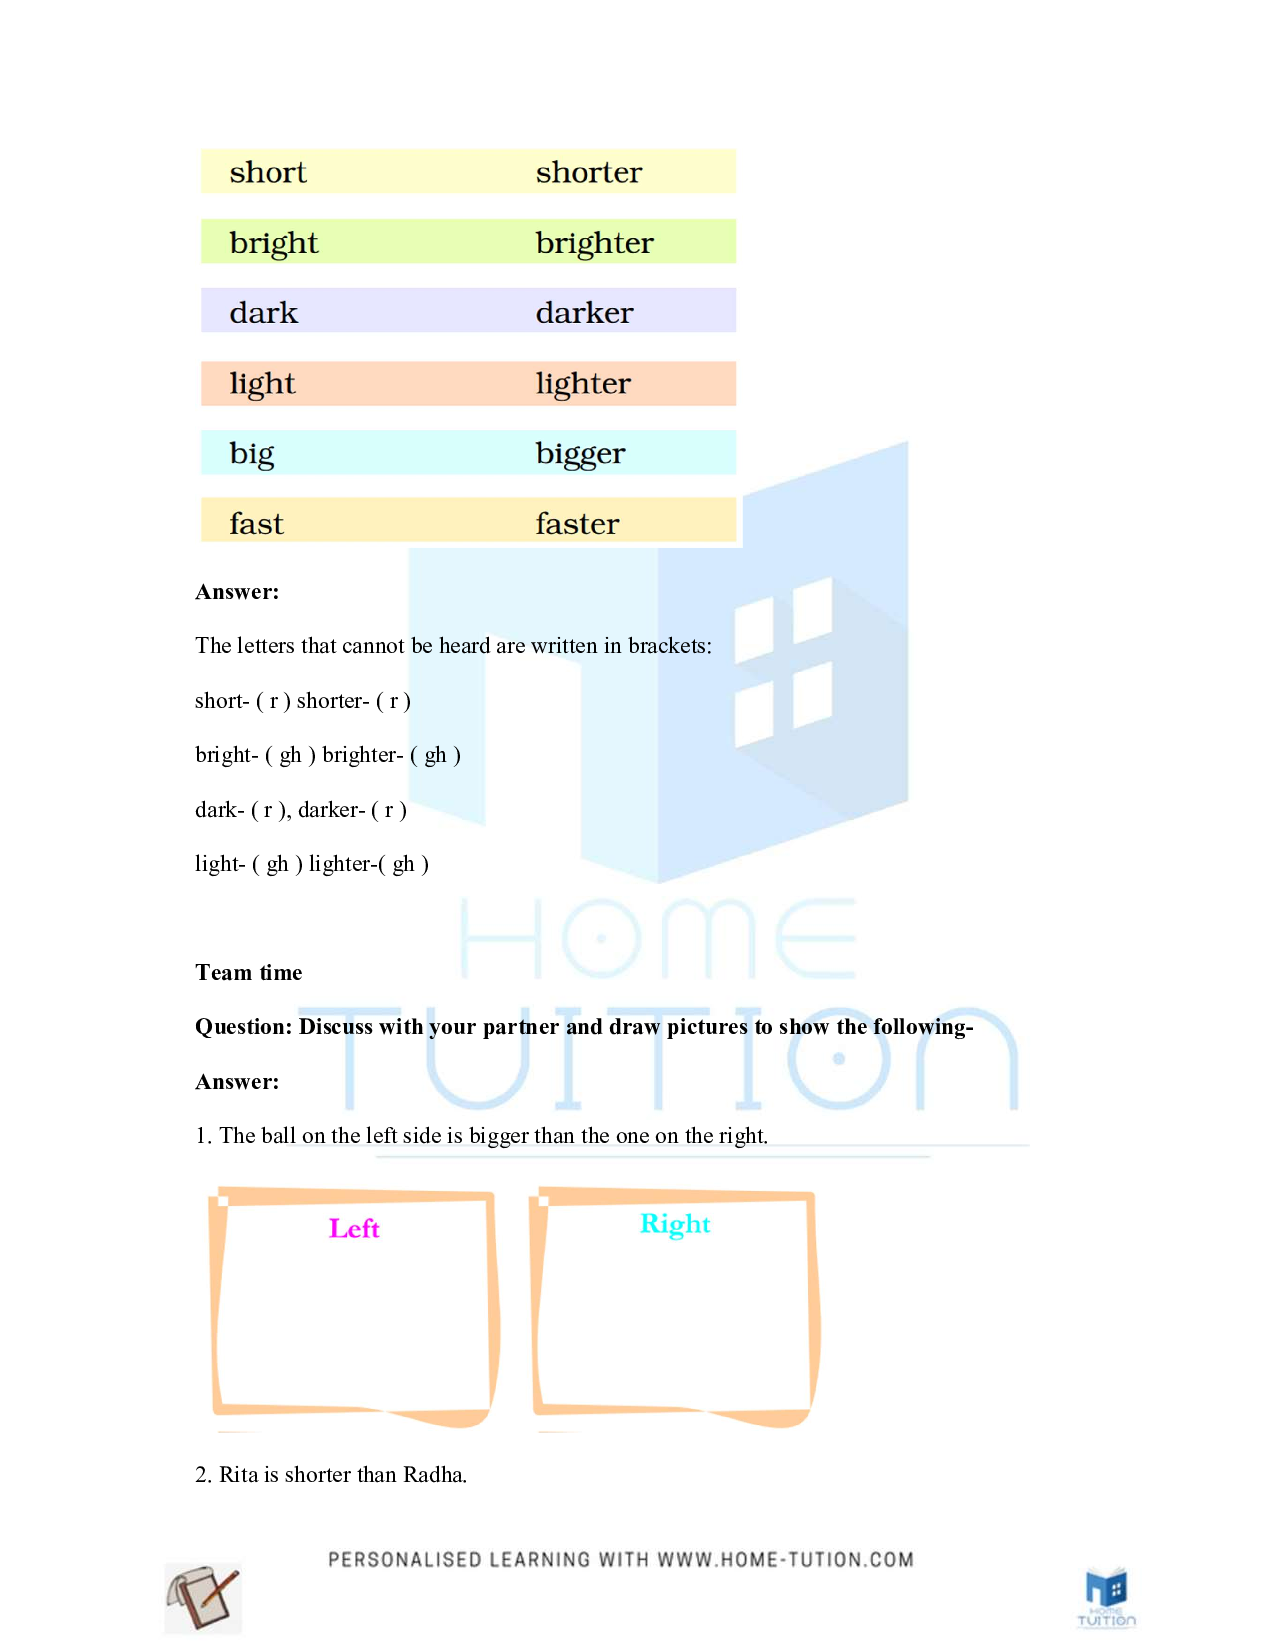 NCERT Solutions for Class 2 English Make it Shorter